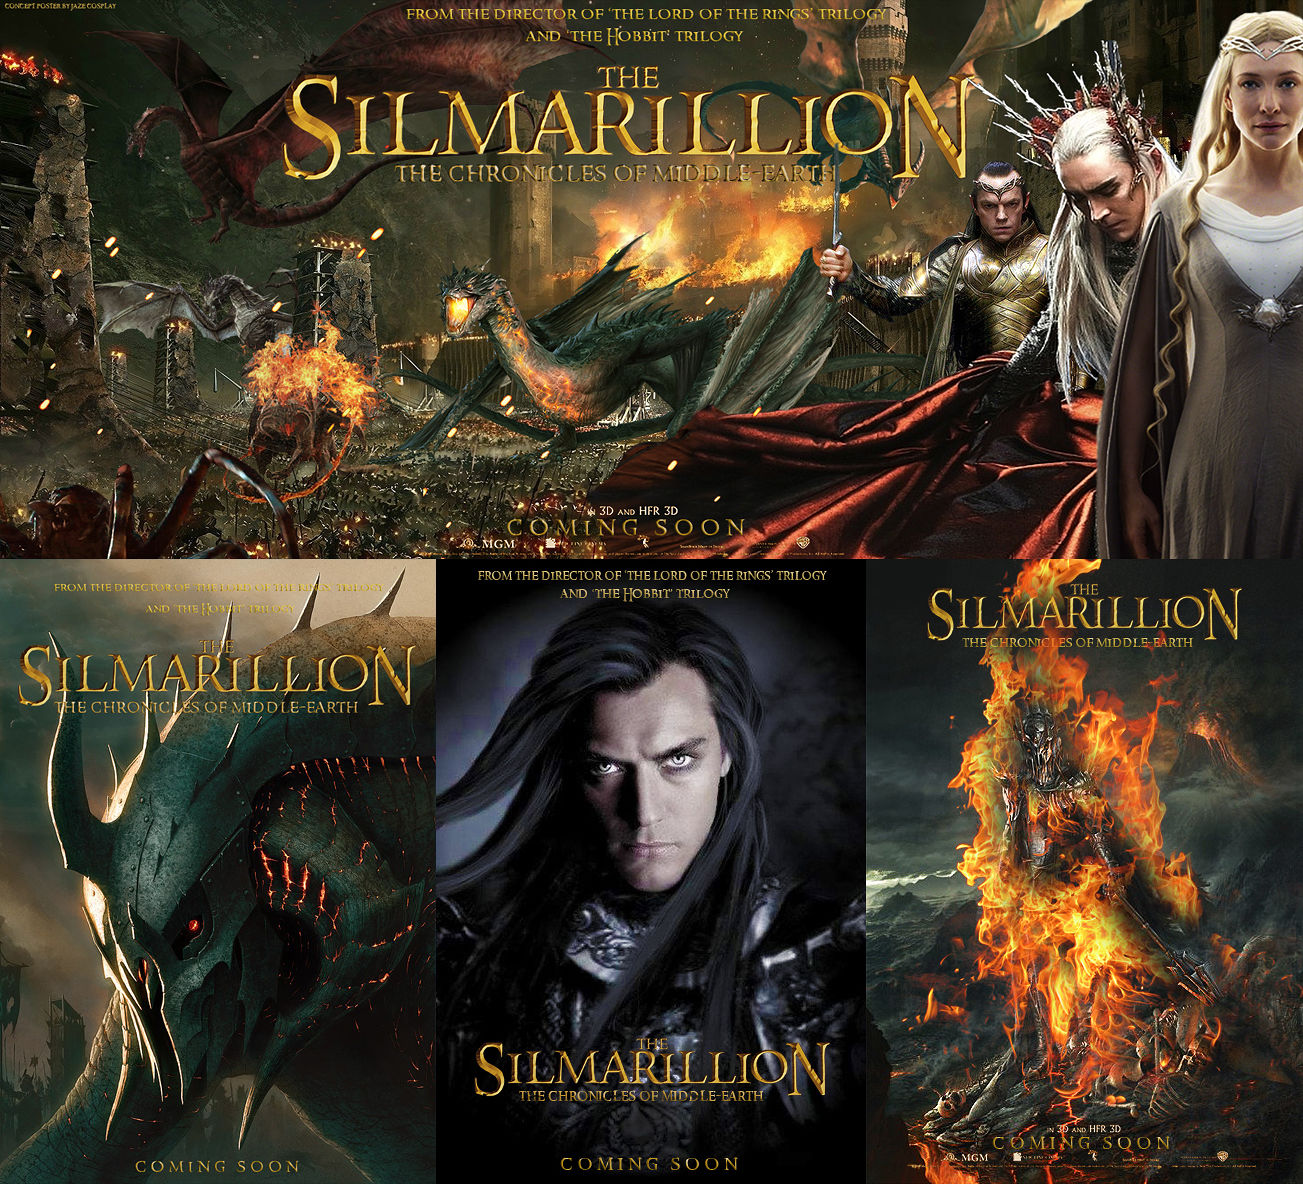 thesilmarillion-the-journey-to-middle-earth-is-not-over-could-peter-jackson-actually-get-the-rights-to-the-silmarillion-jpeg-230421